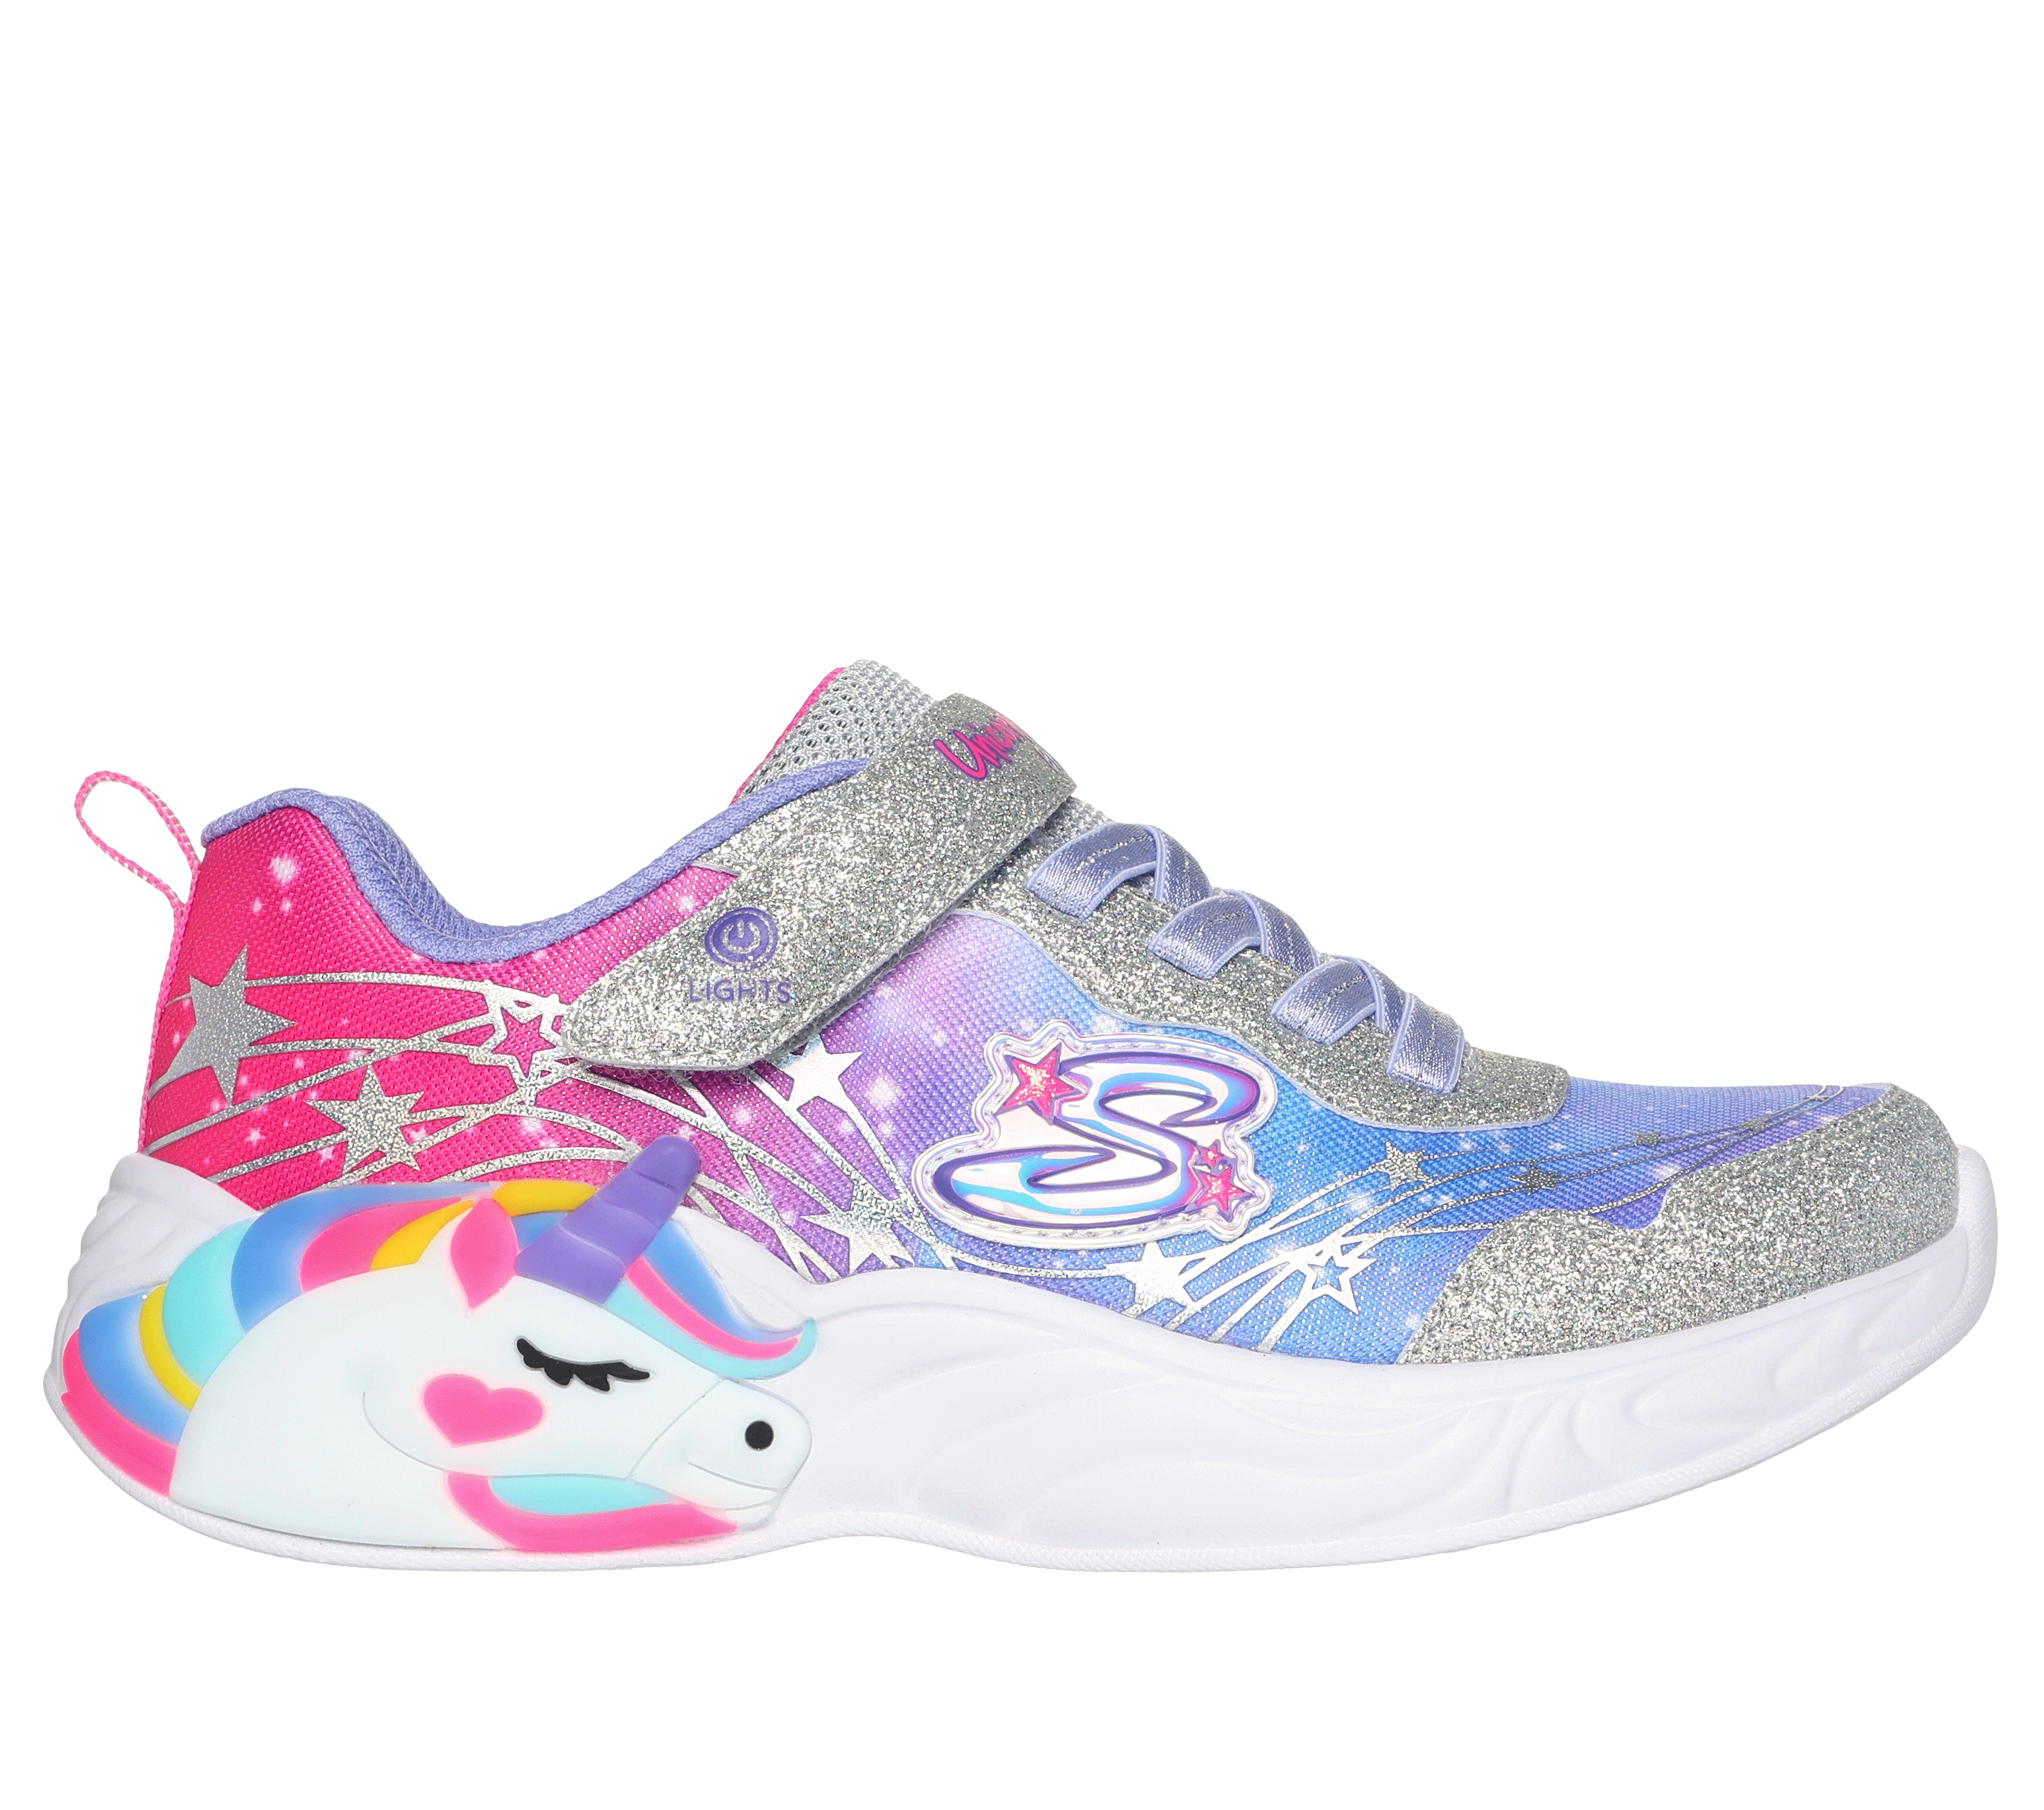 Cutee Girl Athletic Shoes Kids Unicorn Sneakers Toddler, Little